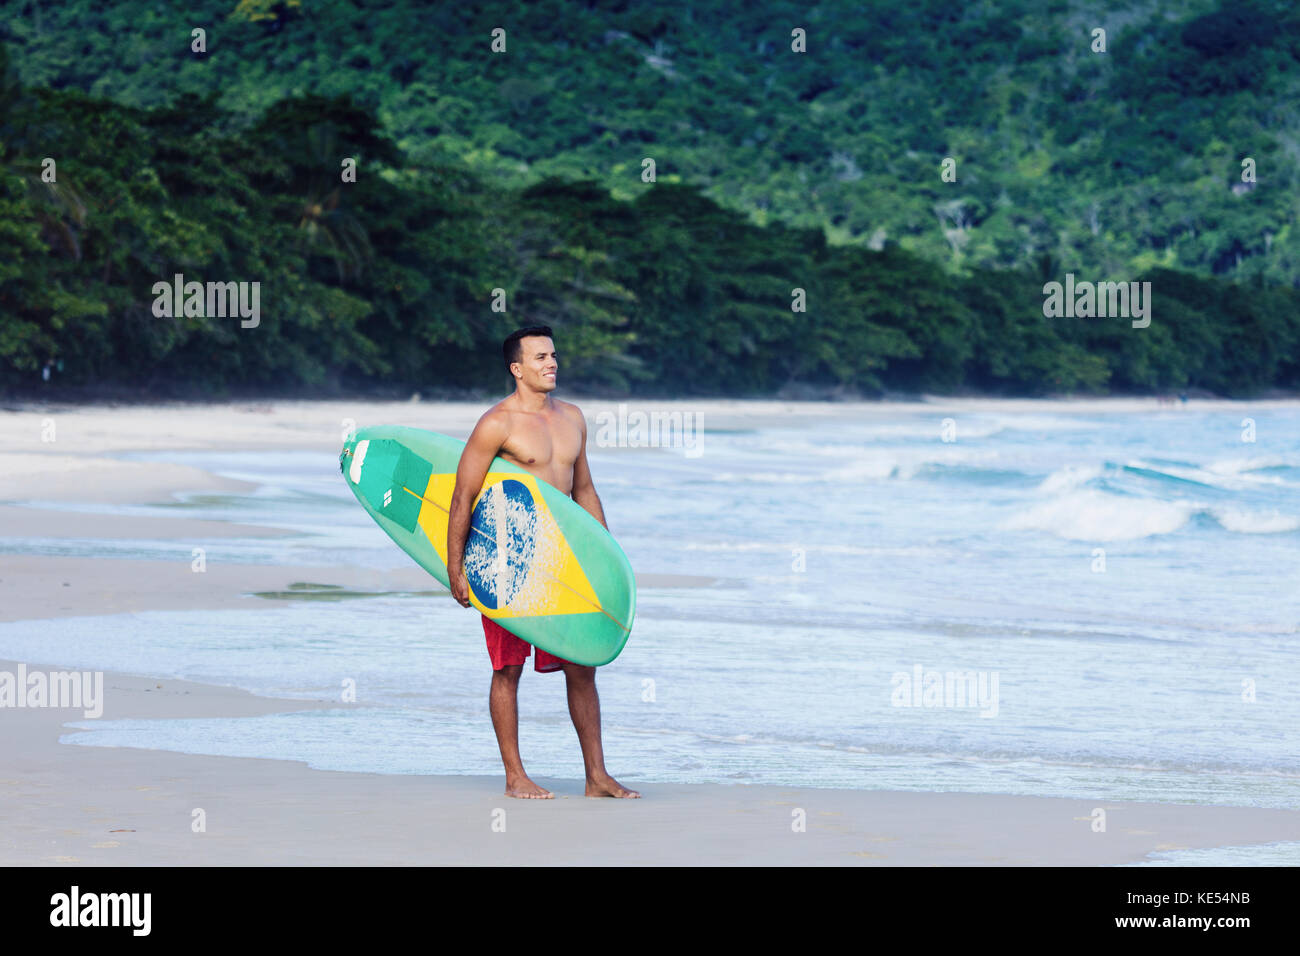 Surfer on pristine beach in Rio de Janeiro state, carrying his board, which shows a Brazilian flag Stock Photo